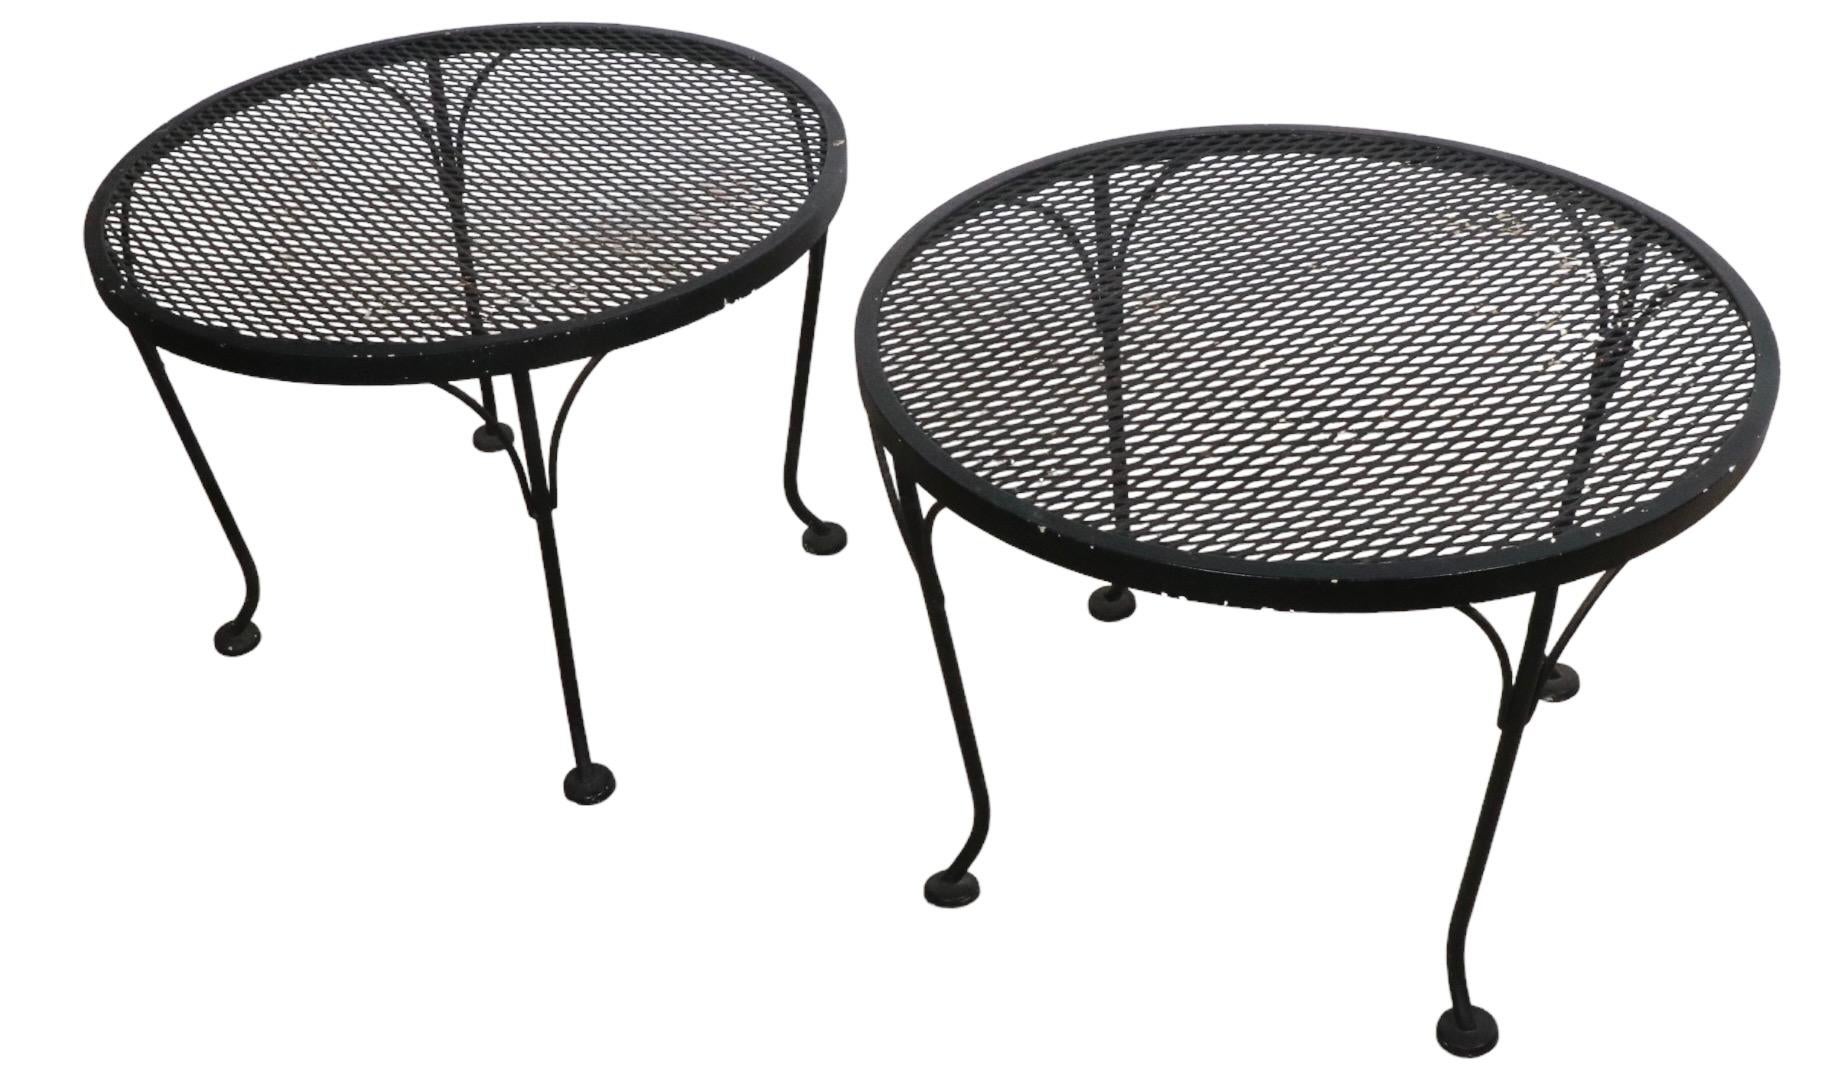 Wrought Iron and Metal Mesh Garden Patio Poolside Side Tables by Woodard 6